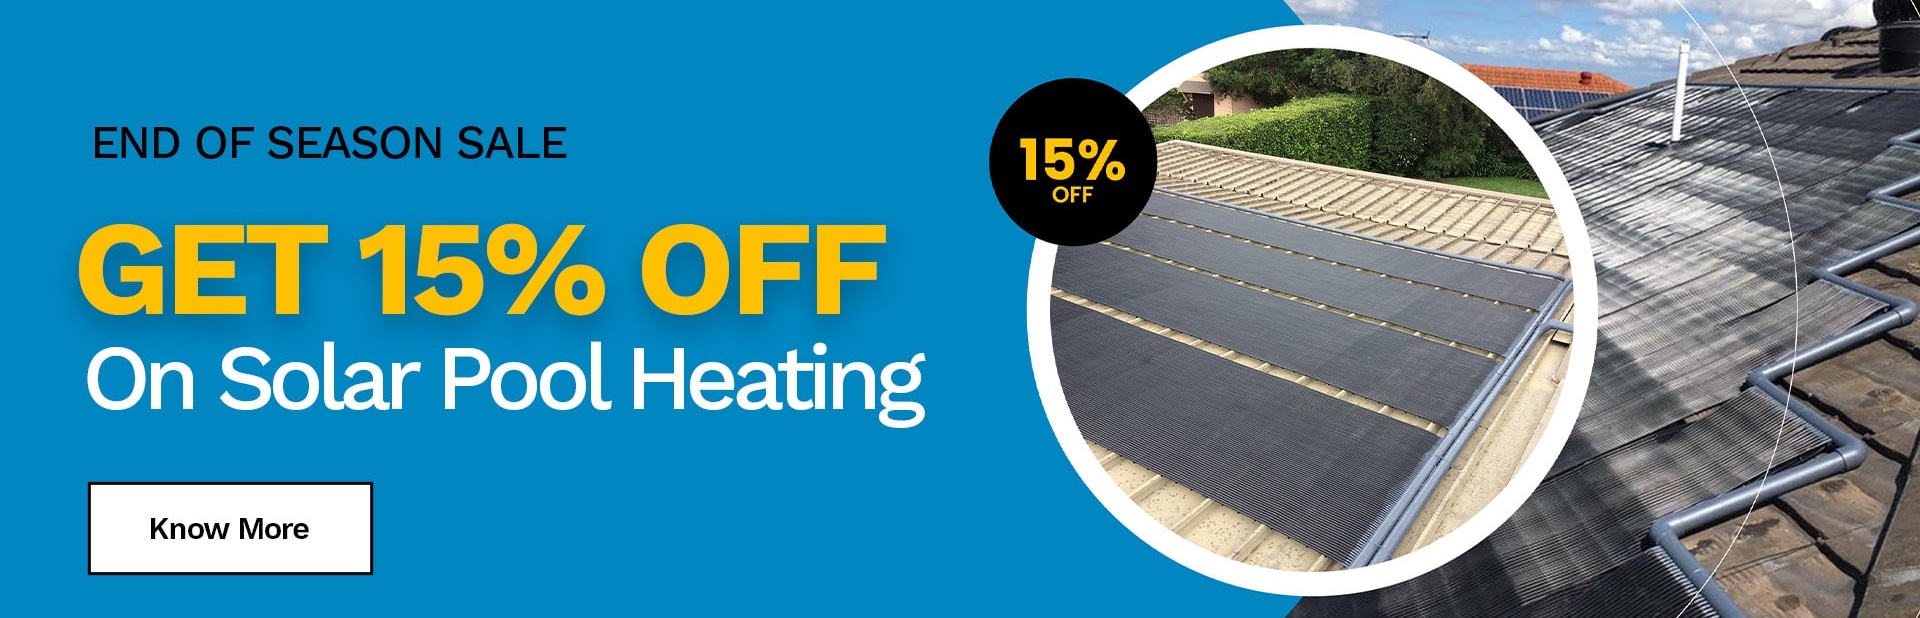 get an offer for solar pool heating systems